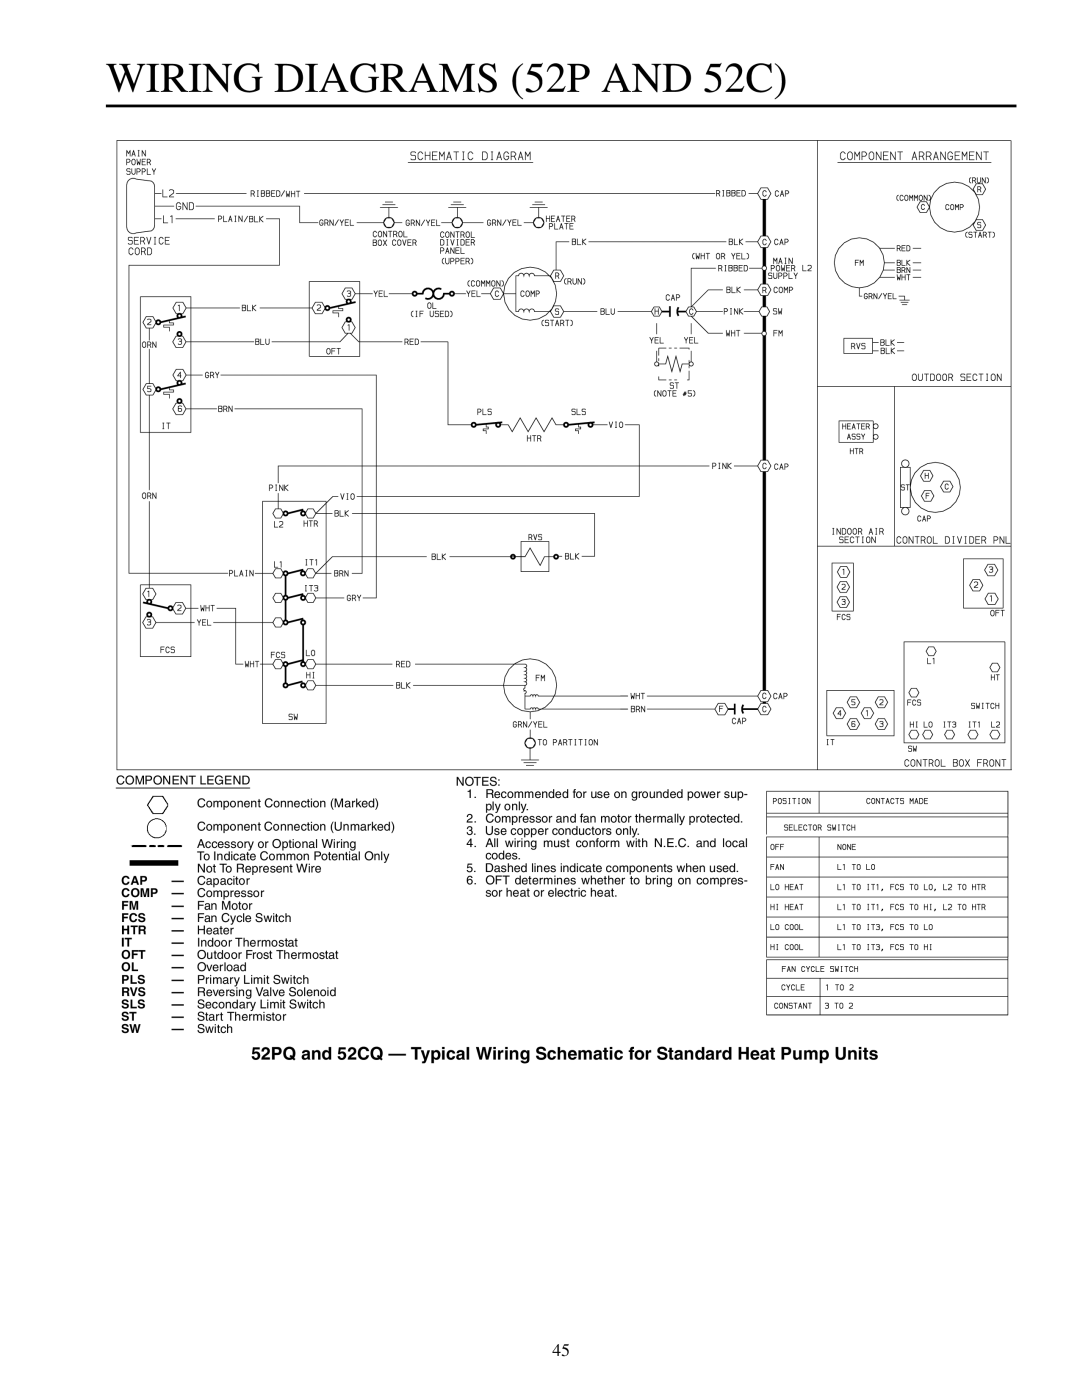 Carrier 592-085 warranty WIRING DIAGRAMS 52P AND 52C 